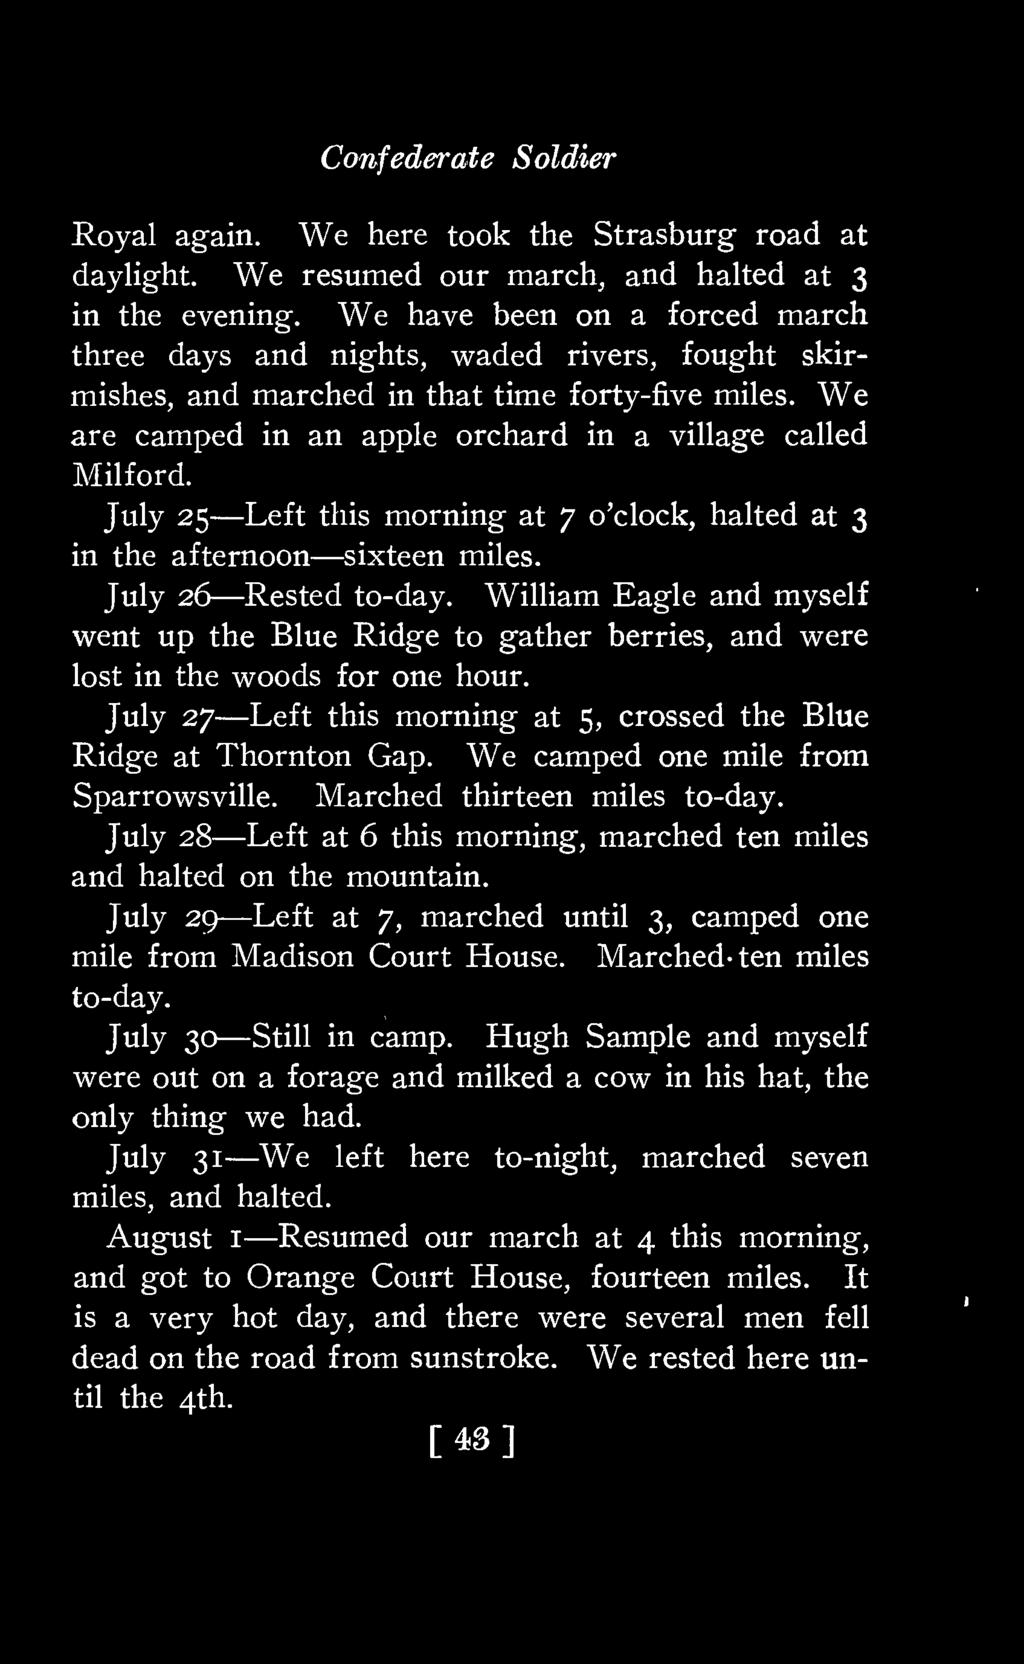 July 25 Left this morning at 7 o'clock, halted at 3 in the afternoon sixteen miles. July 26 Rested to-day.